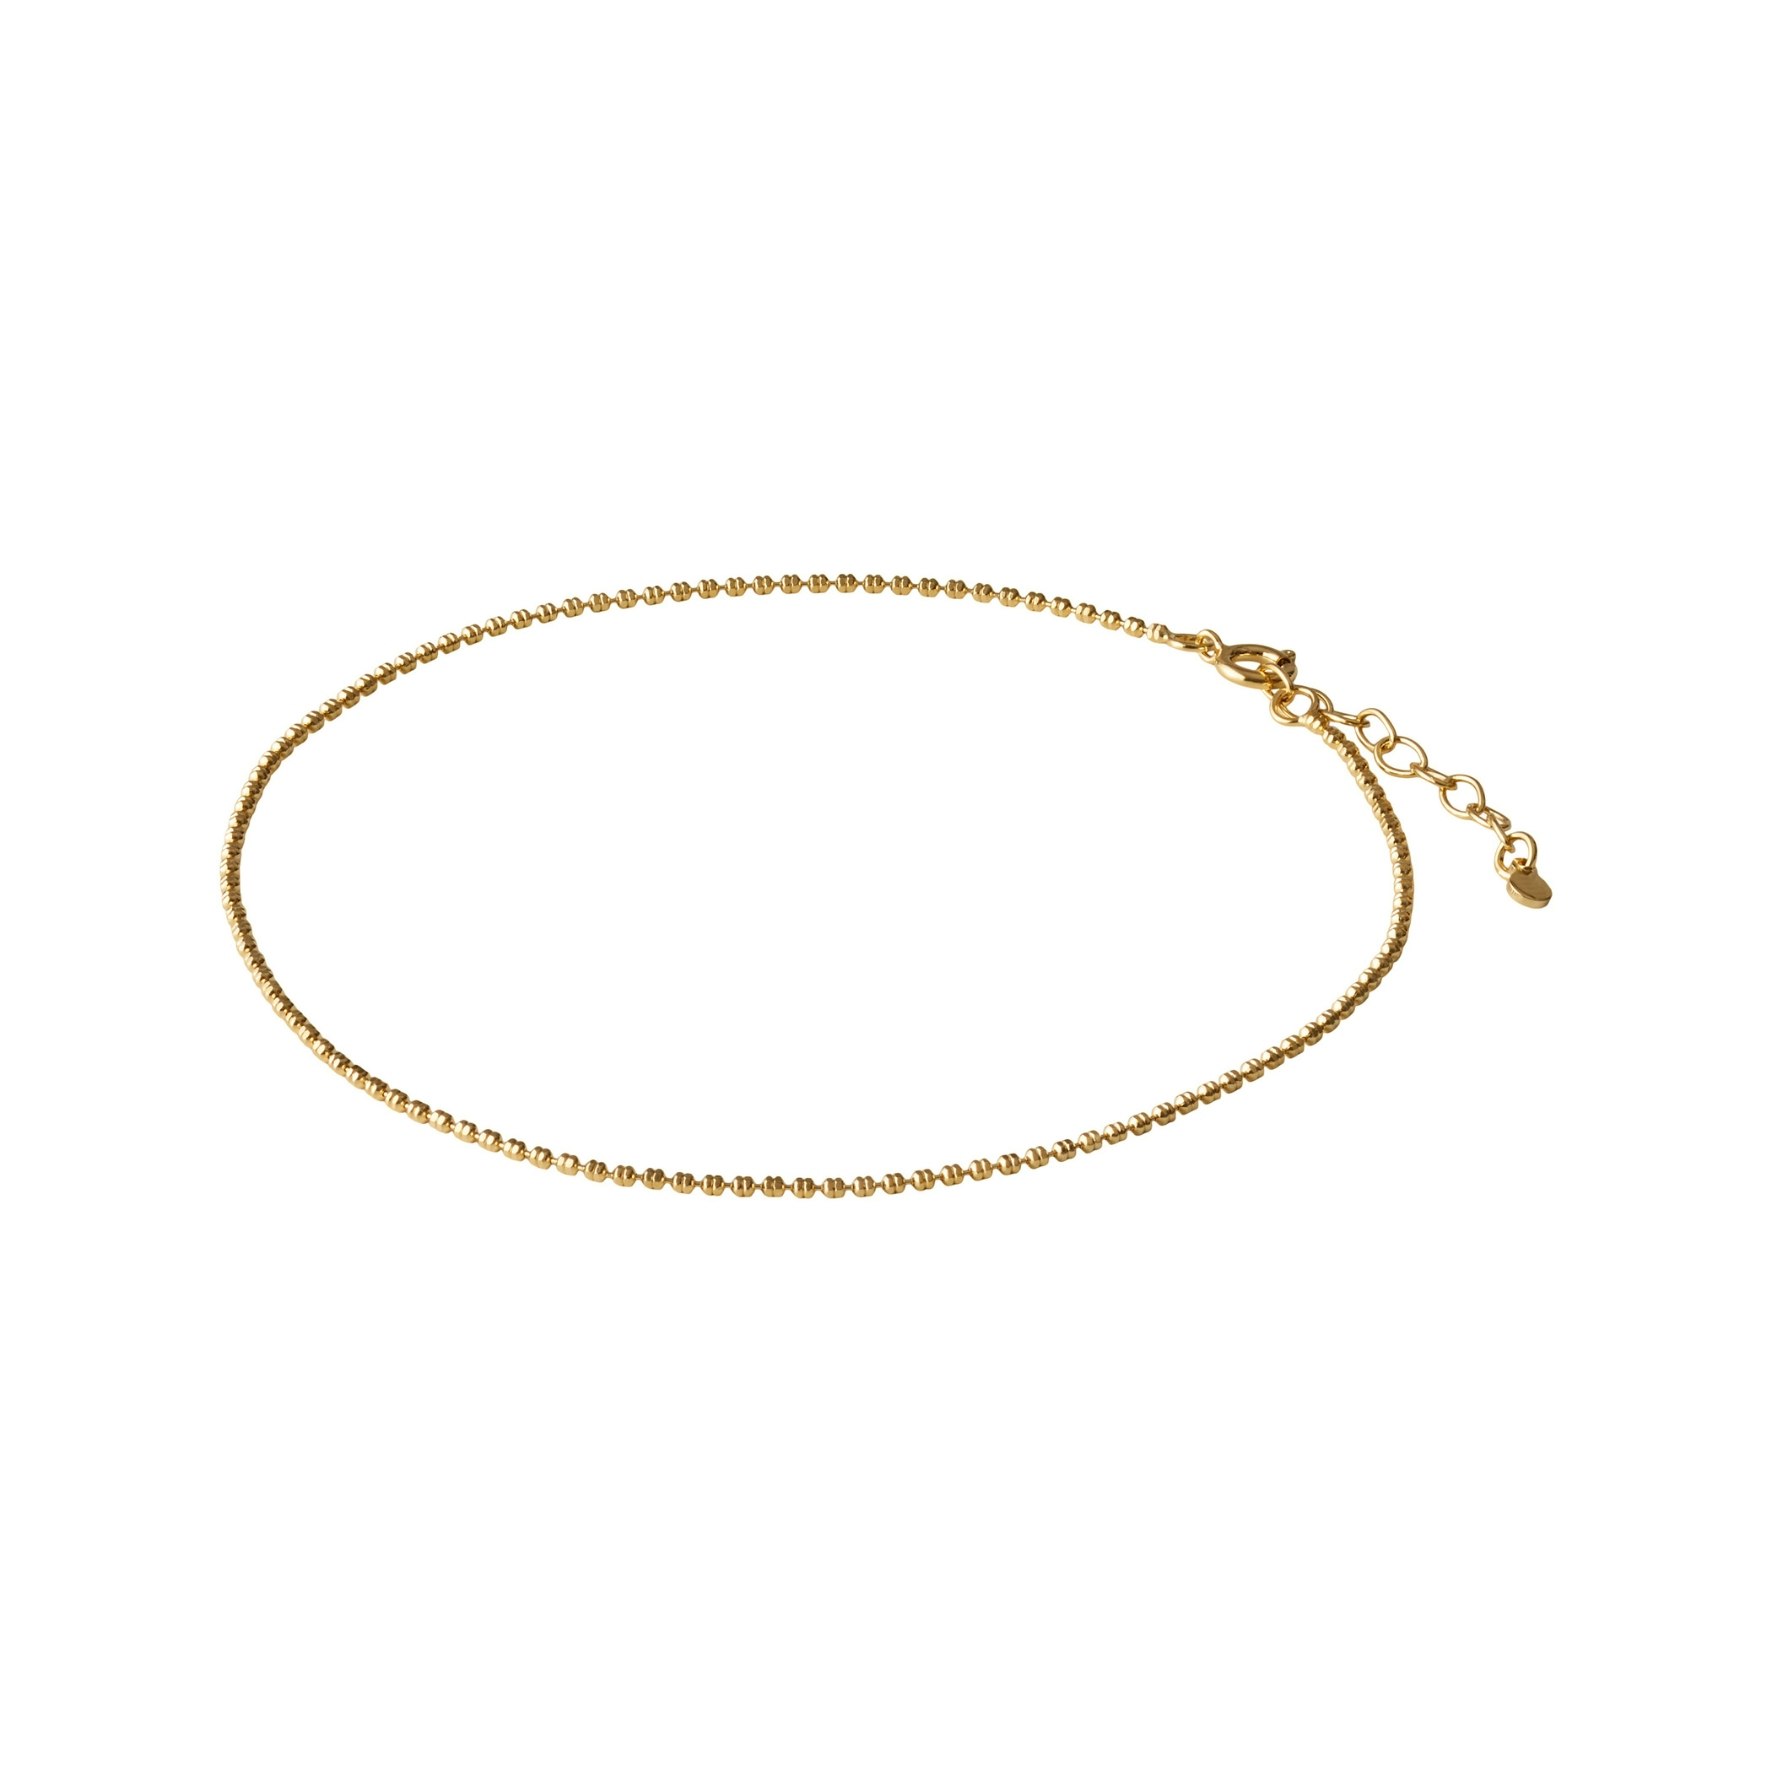 Nelly Anklet from Pernille Corydon in Goldplated Silver Sterling 925